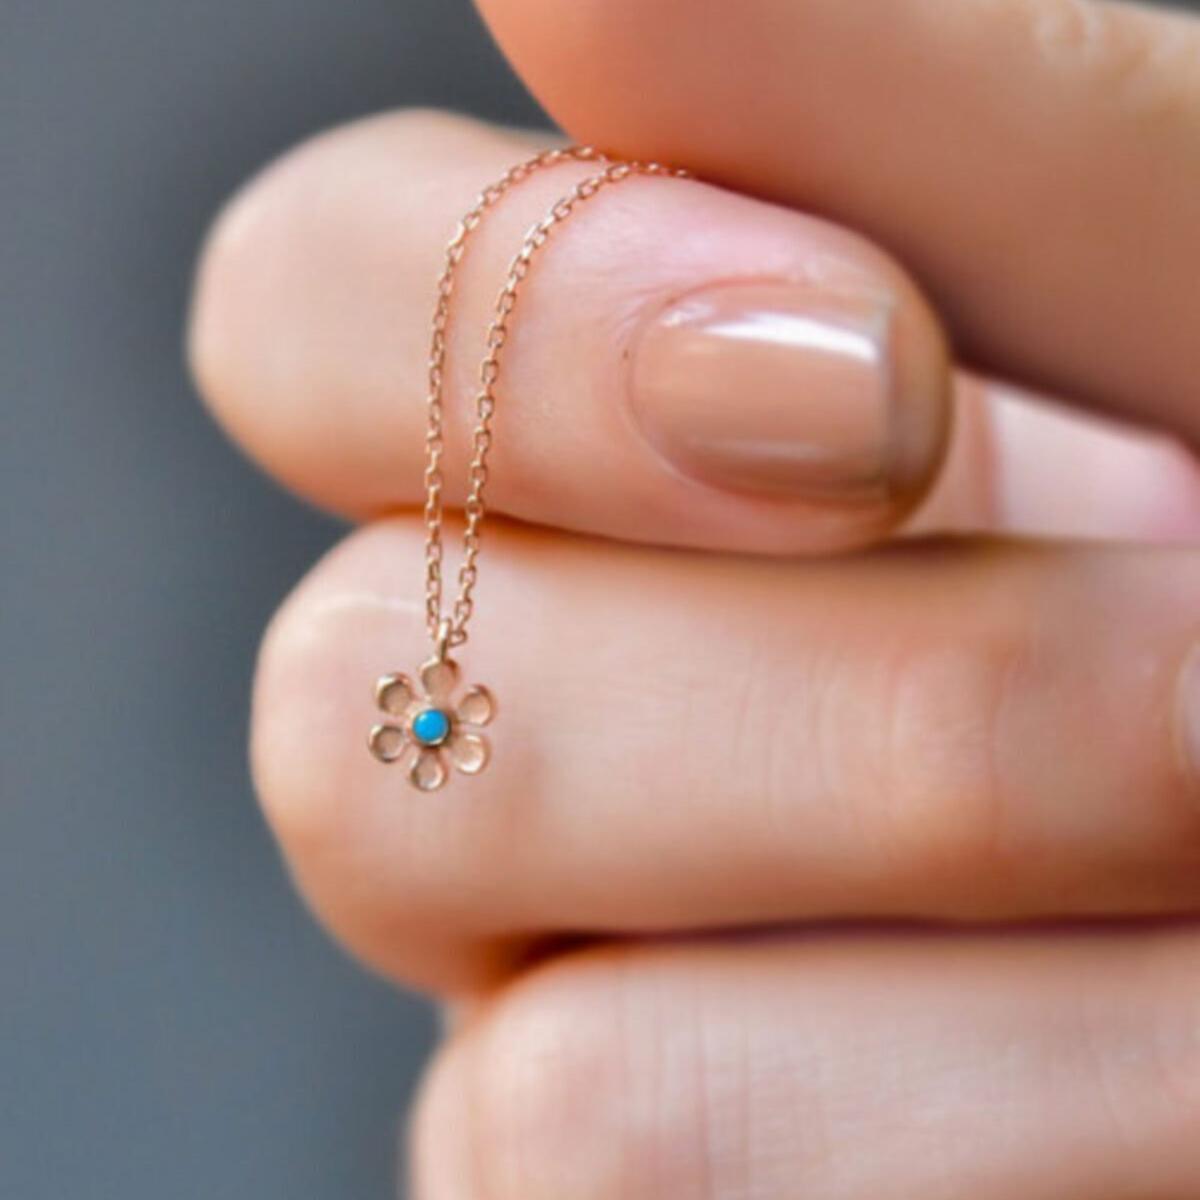 Daisy Flower Necklace • Turquoise Gold Necklace • Gold Flower Necklace - Trending Silver Gifts